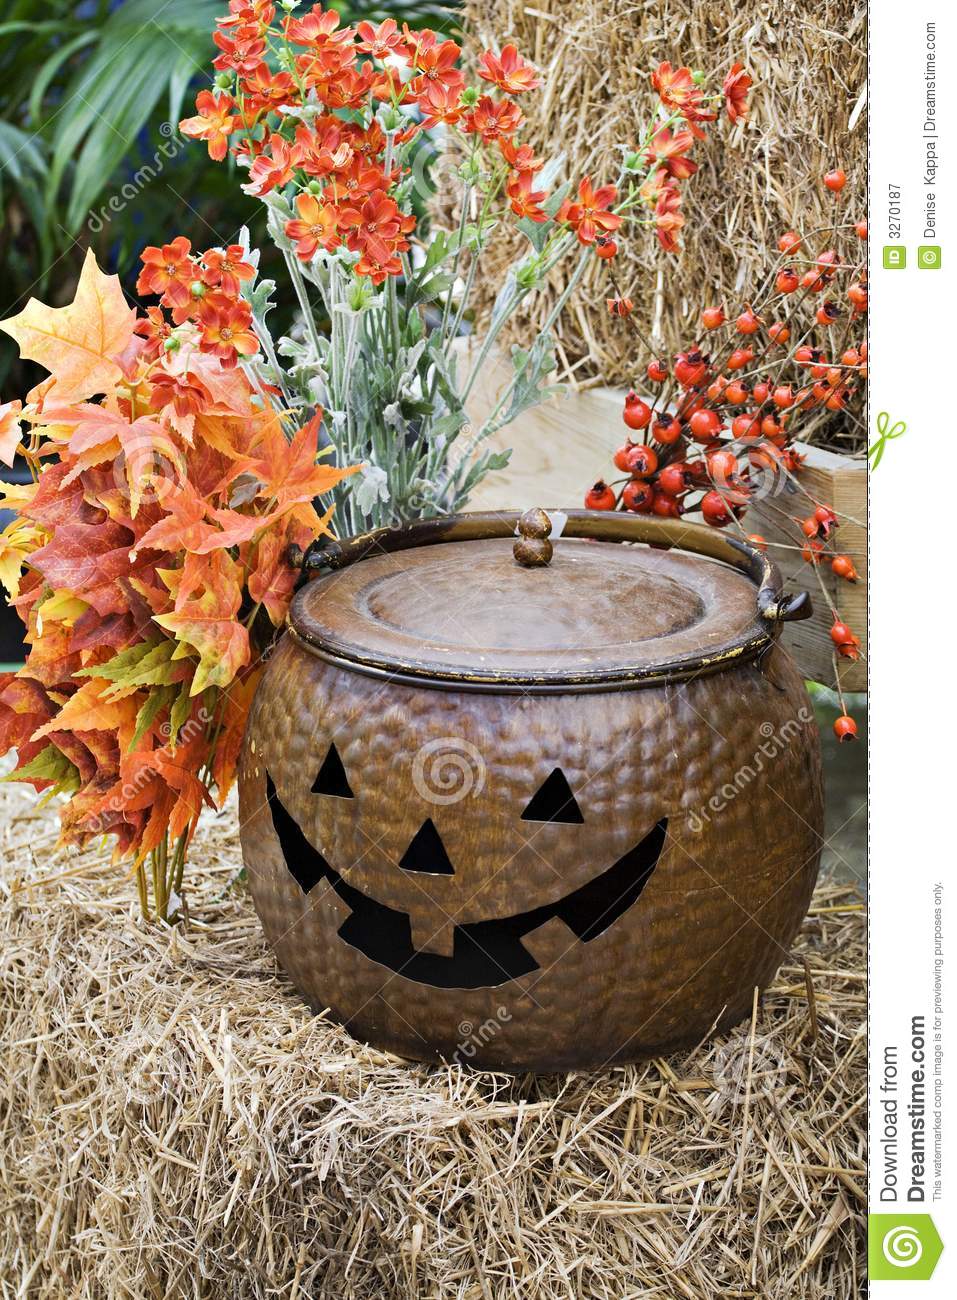 Fall Decorations Royalty Free Stock Photography   Image  3270187